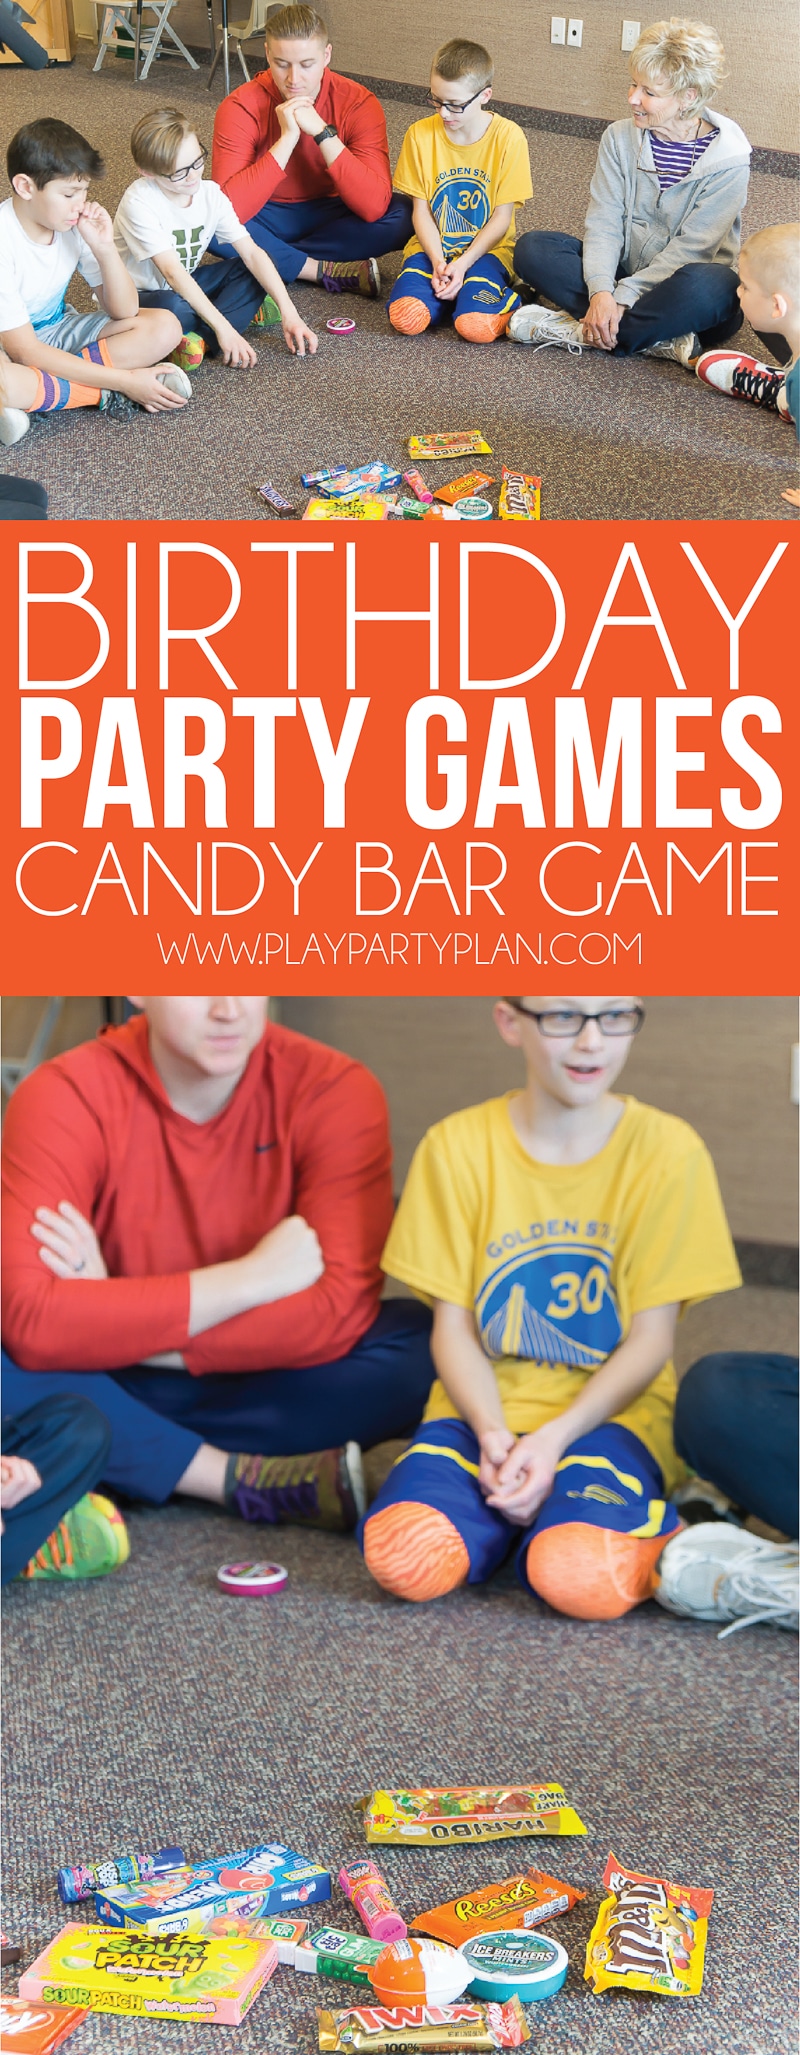 teen-party-game-ideas-examples-and-forms